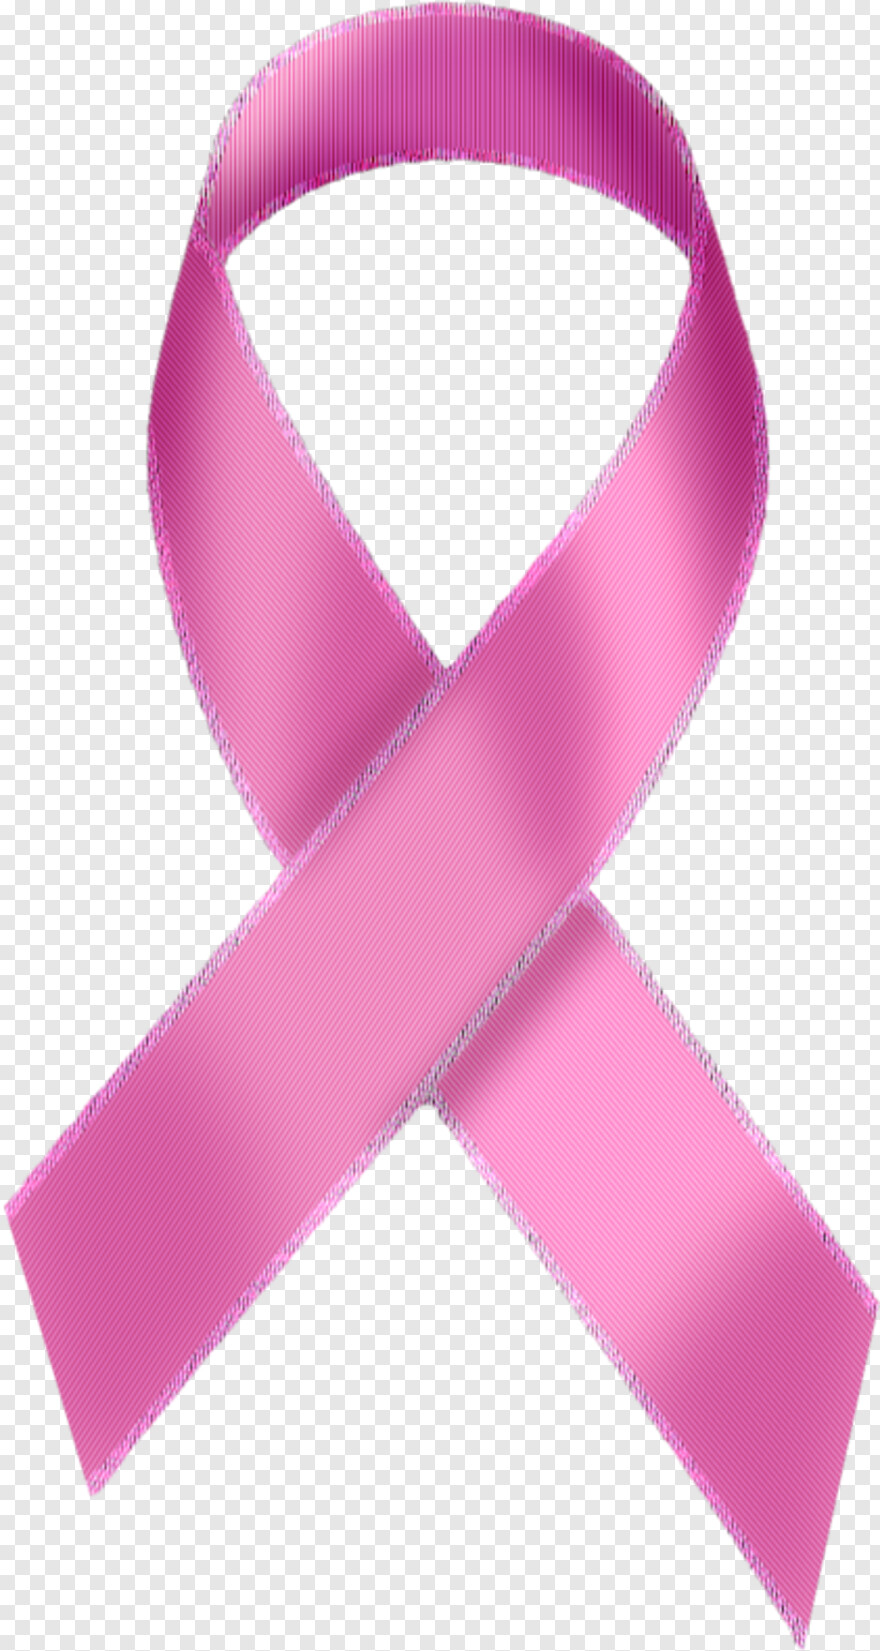 breast-cancer-awareness # 438644